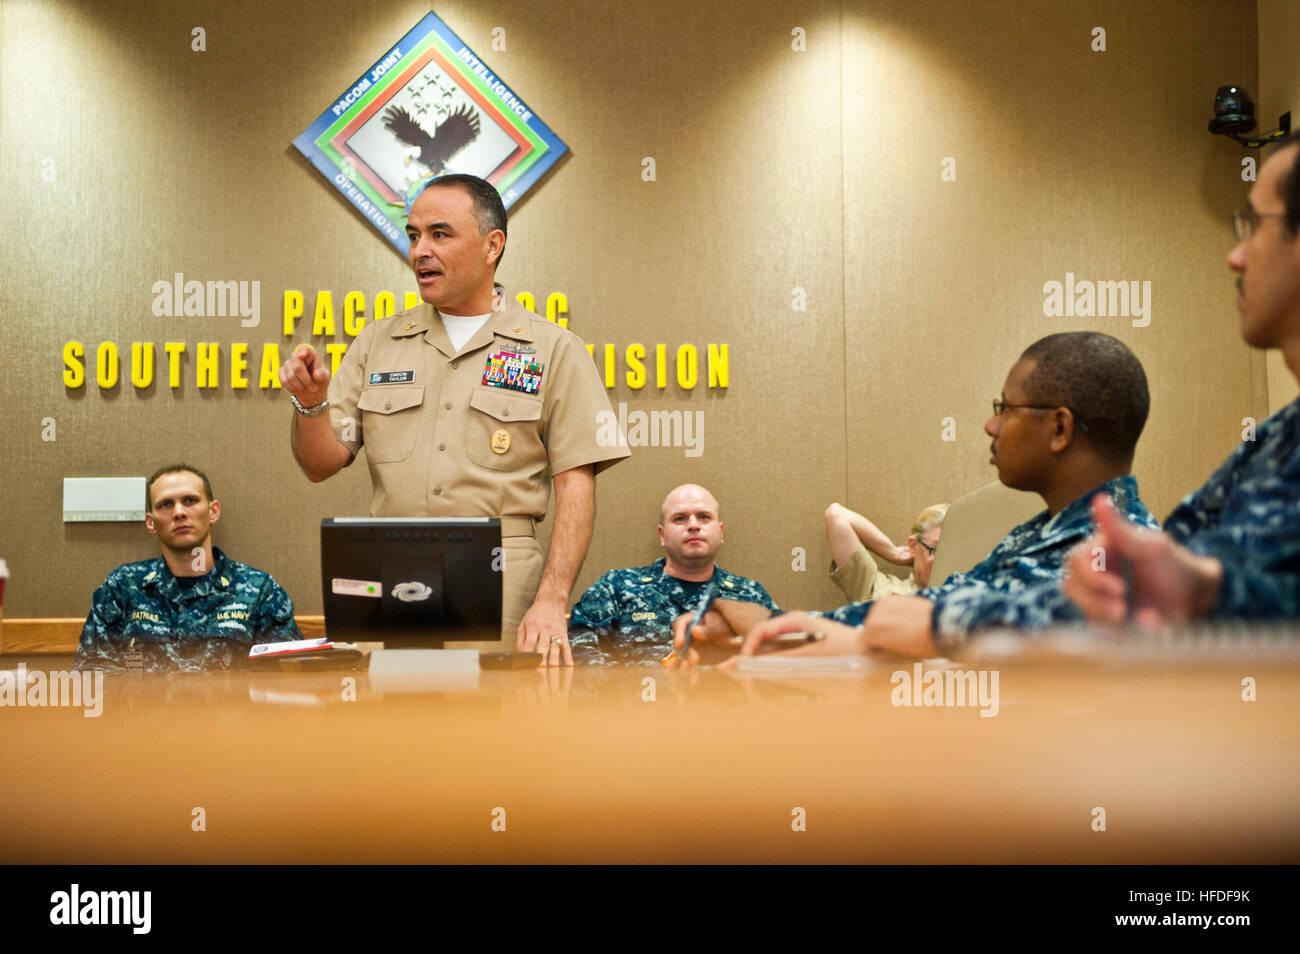 131204-N-CZ945-012  PEARL HARBOR (Dec. 4, 2013) U.S. Fleet Cyber Command Command Master Chief Jon R. Taylor speaks with first class petty officers assigned to U.S. Pacific Command Joint Intelligence Operations Center and Defense Intelligence Agency, while visiting various Navy Region Hawaii commands. Taylor concluded the brief with a question and answer forum between the Sailors and him. (U.S. Navy photo by Mass Communication Specialist 1st Class Kenneth R. Hendrix/Released) US Fleet Cyber Command leader addresses petty officers 131204-N-CZ945-012 Stock Photo